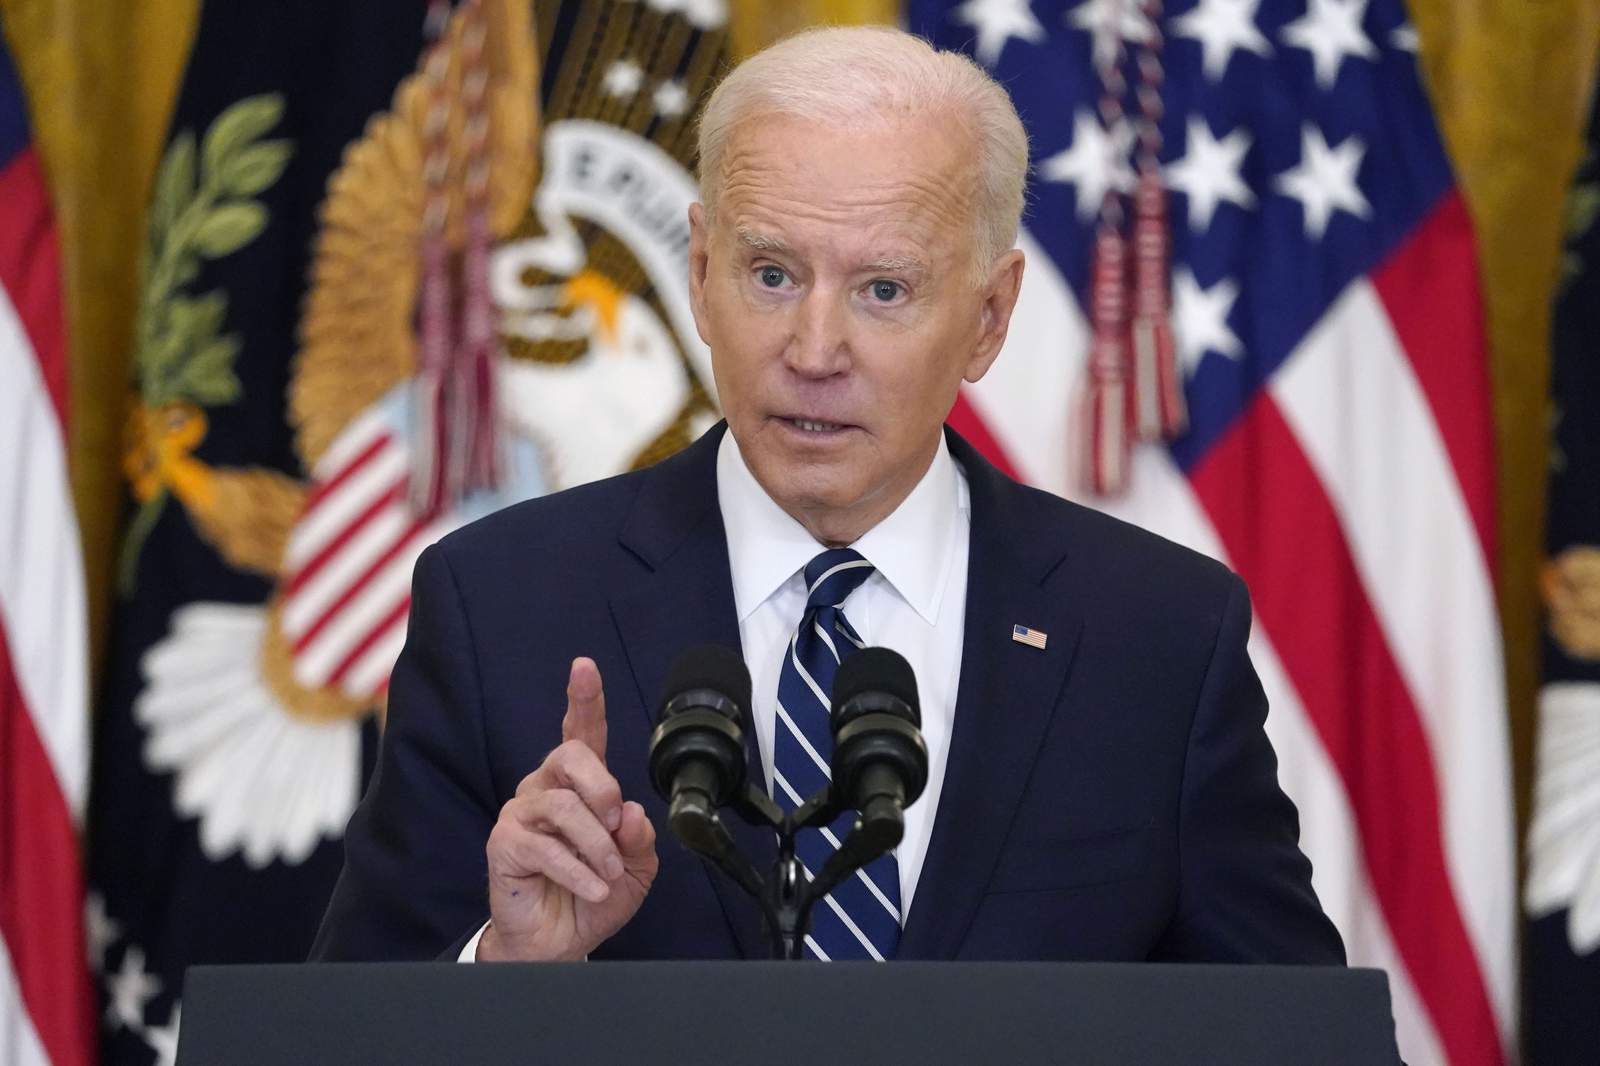 WATCH: President Biden held his first formal news conference